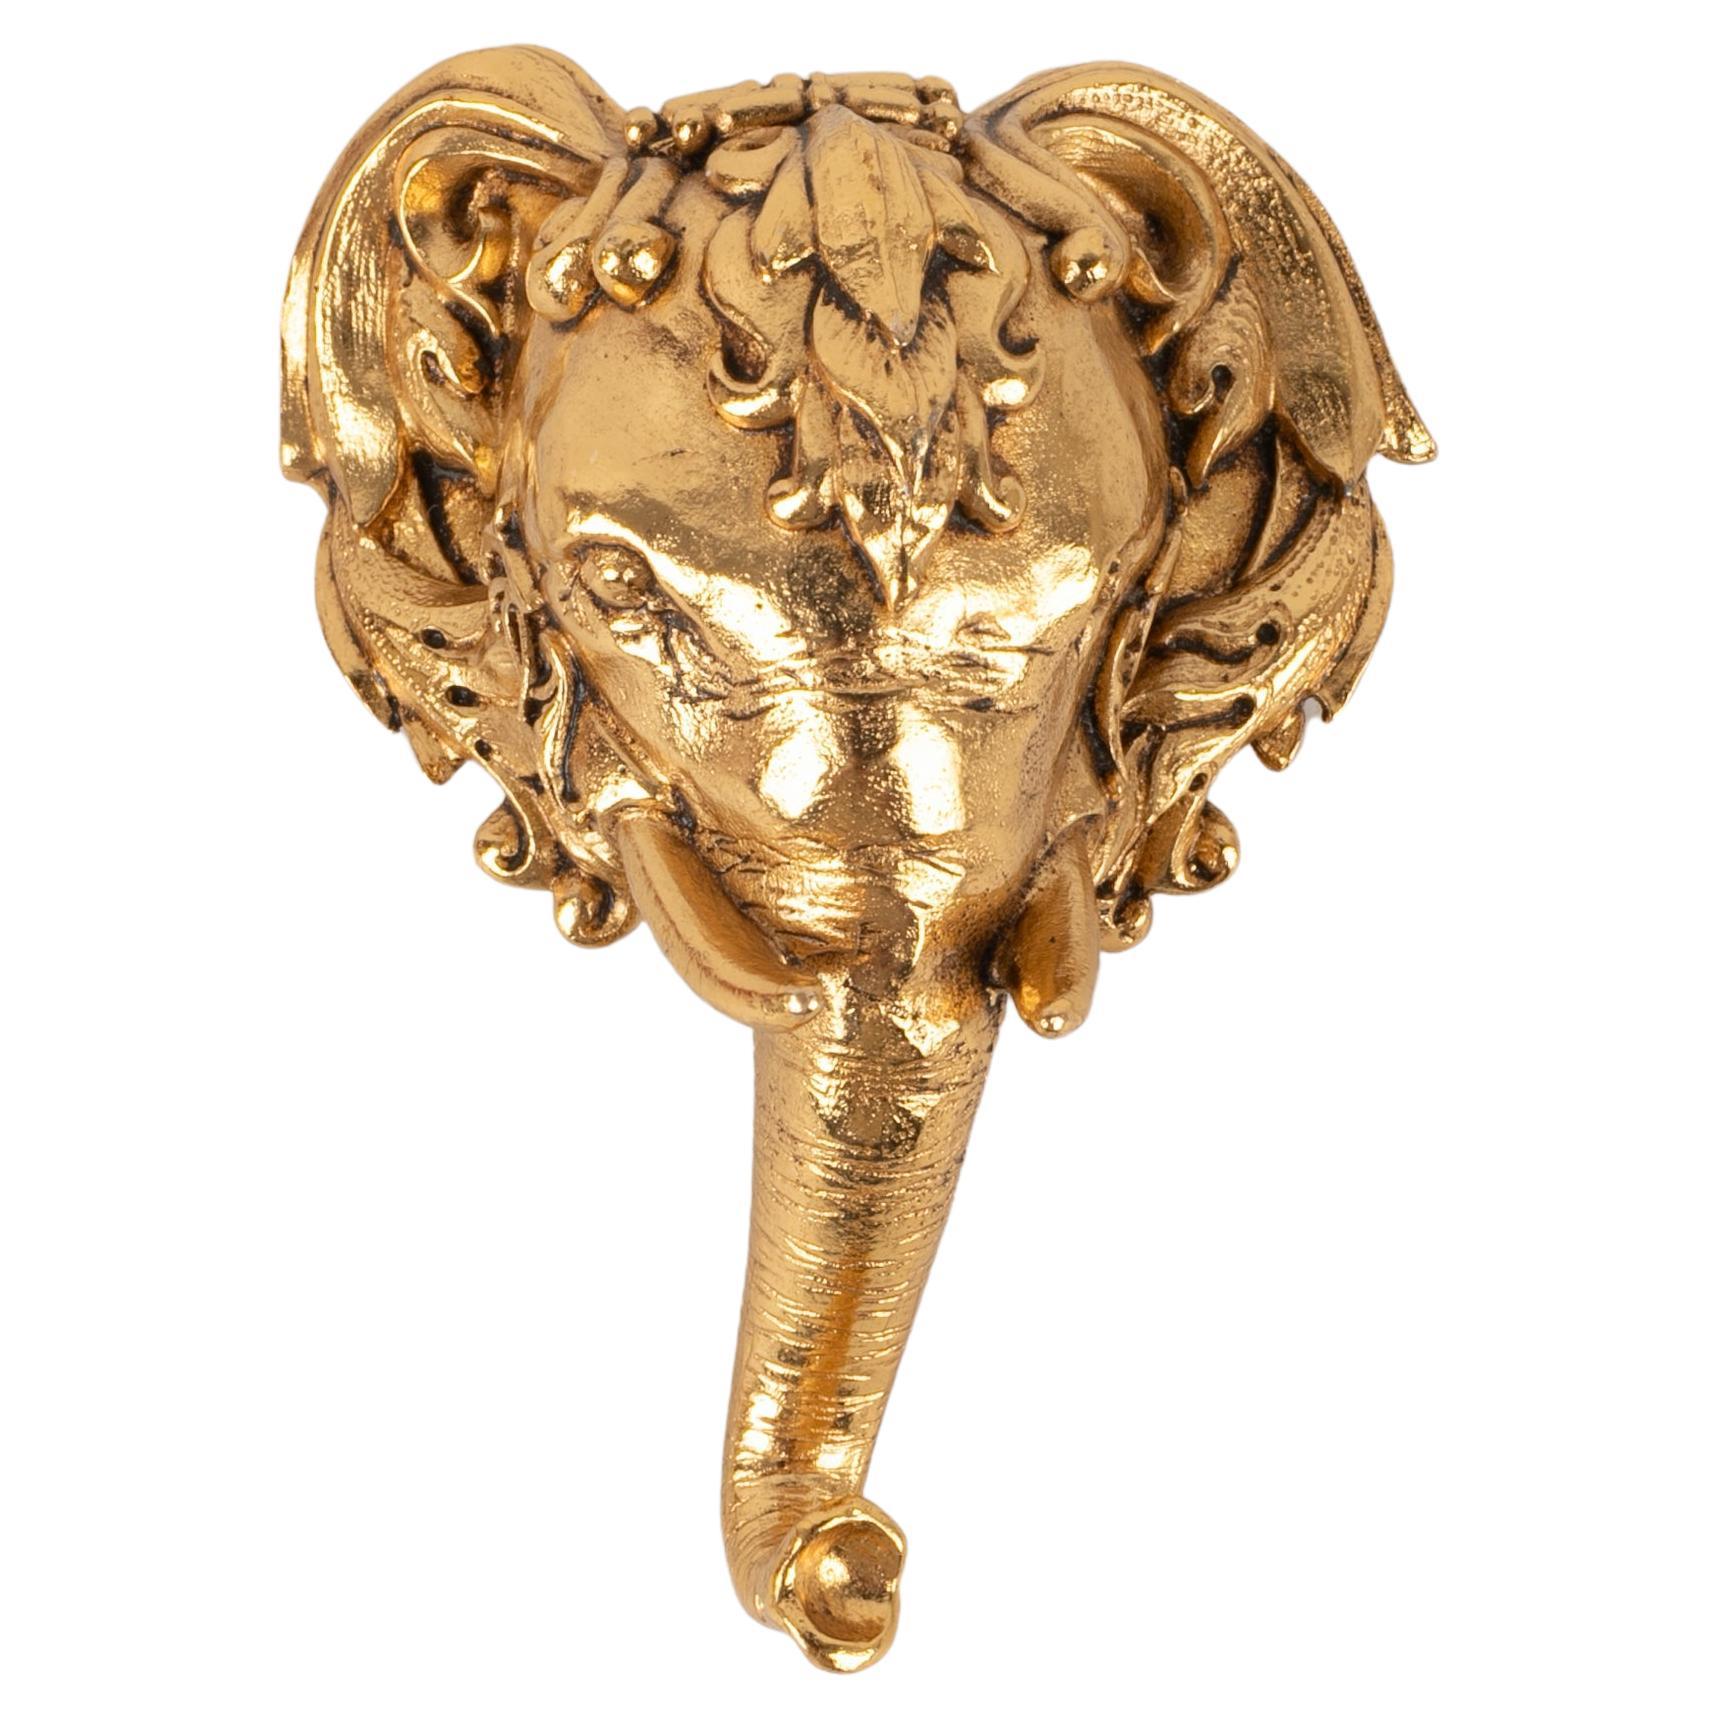 Christian Dior Gold-Plated Metal Pendant Brooch Depicting an Elephant Head For Sale